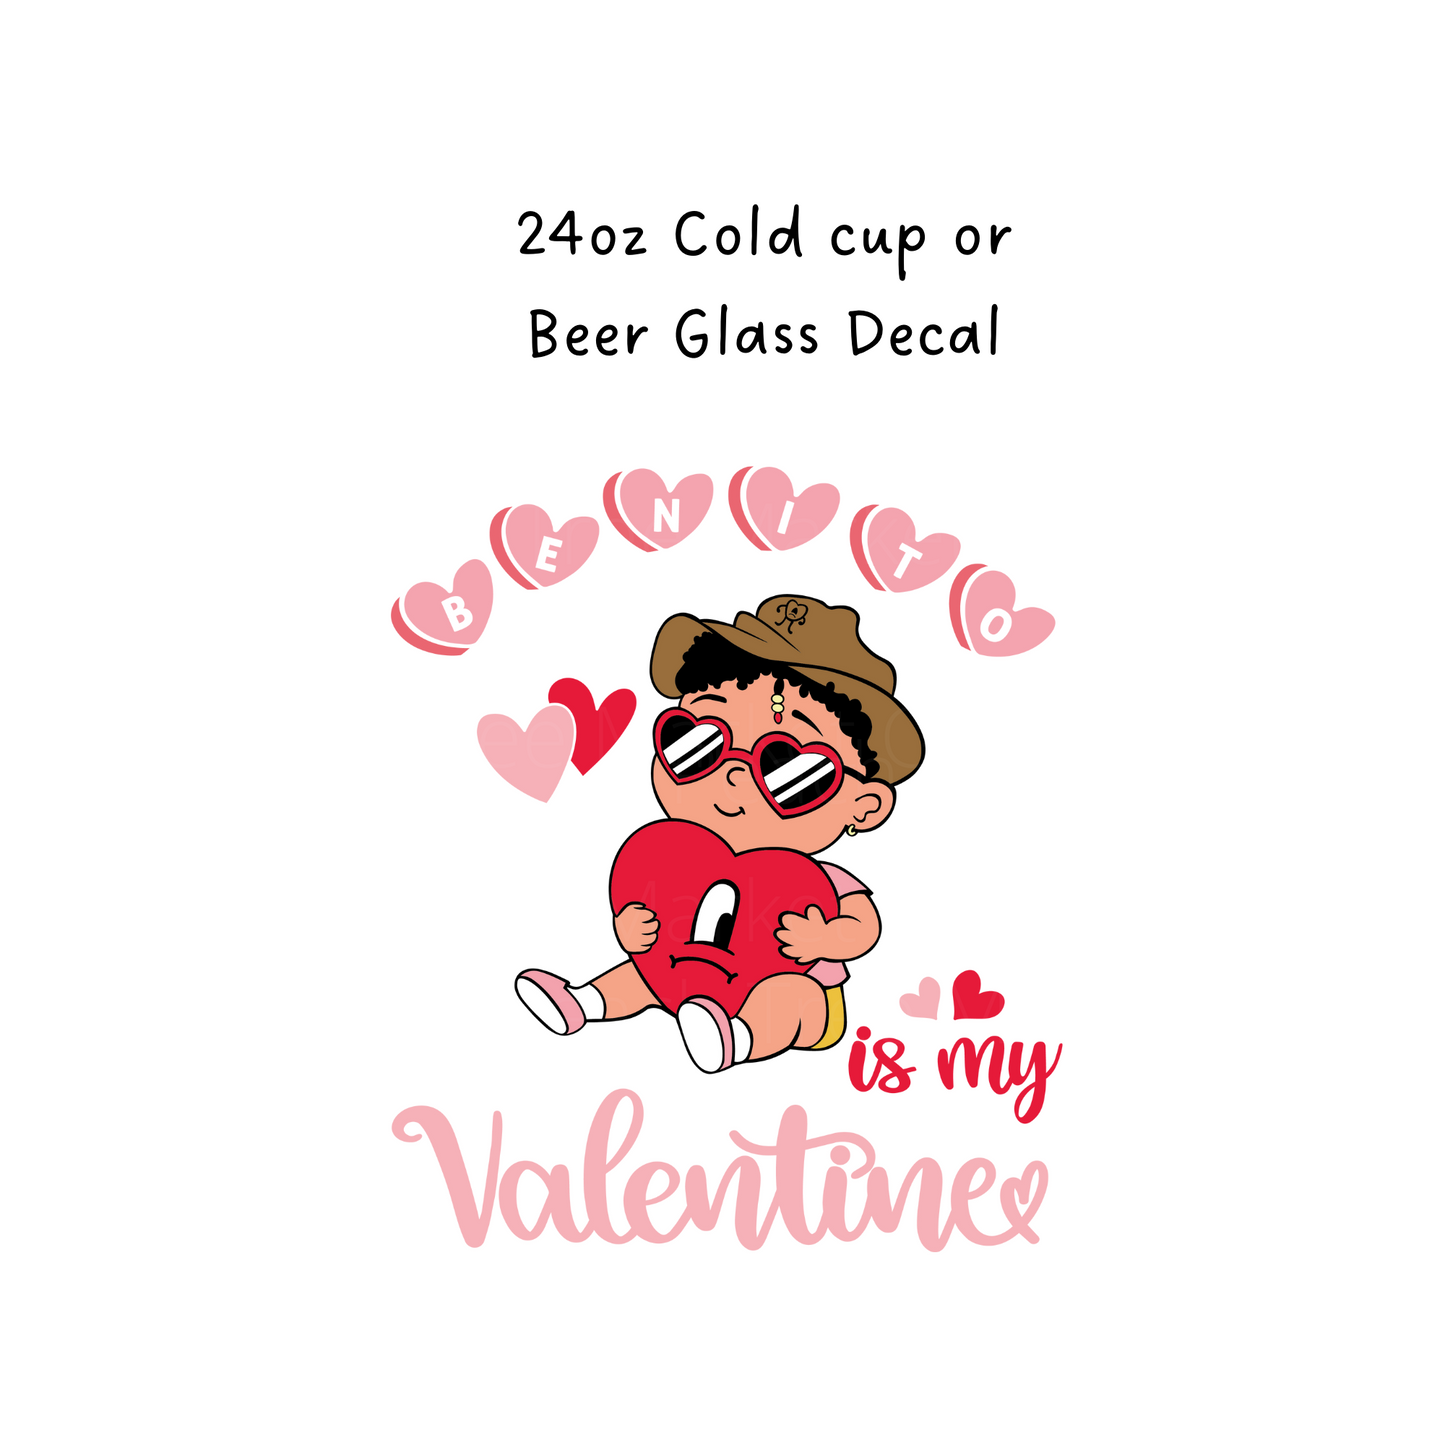 Benito is my valentine Cold Cup or Beer Glass Decal